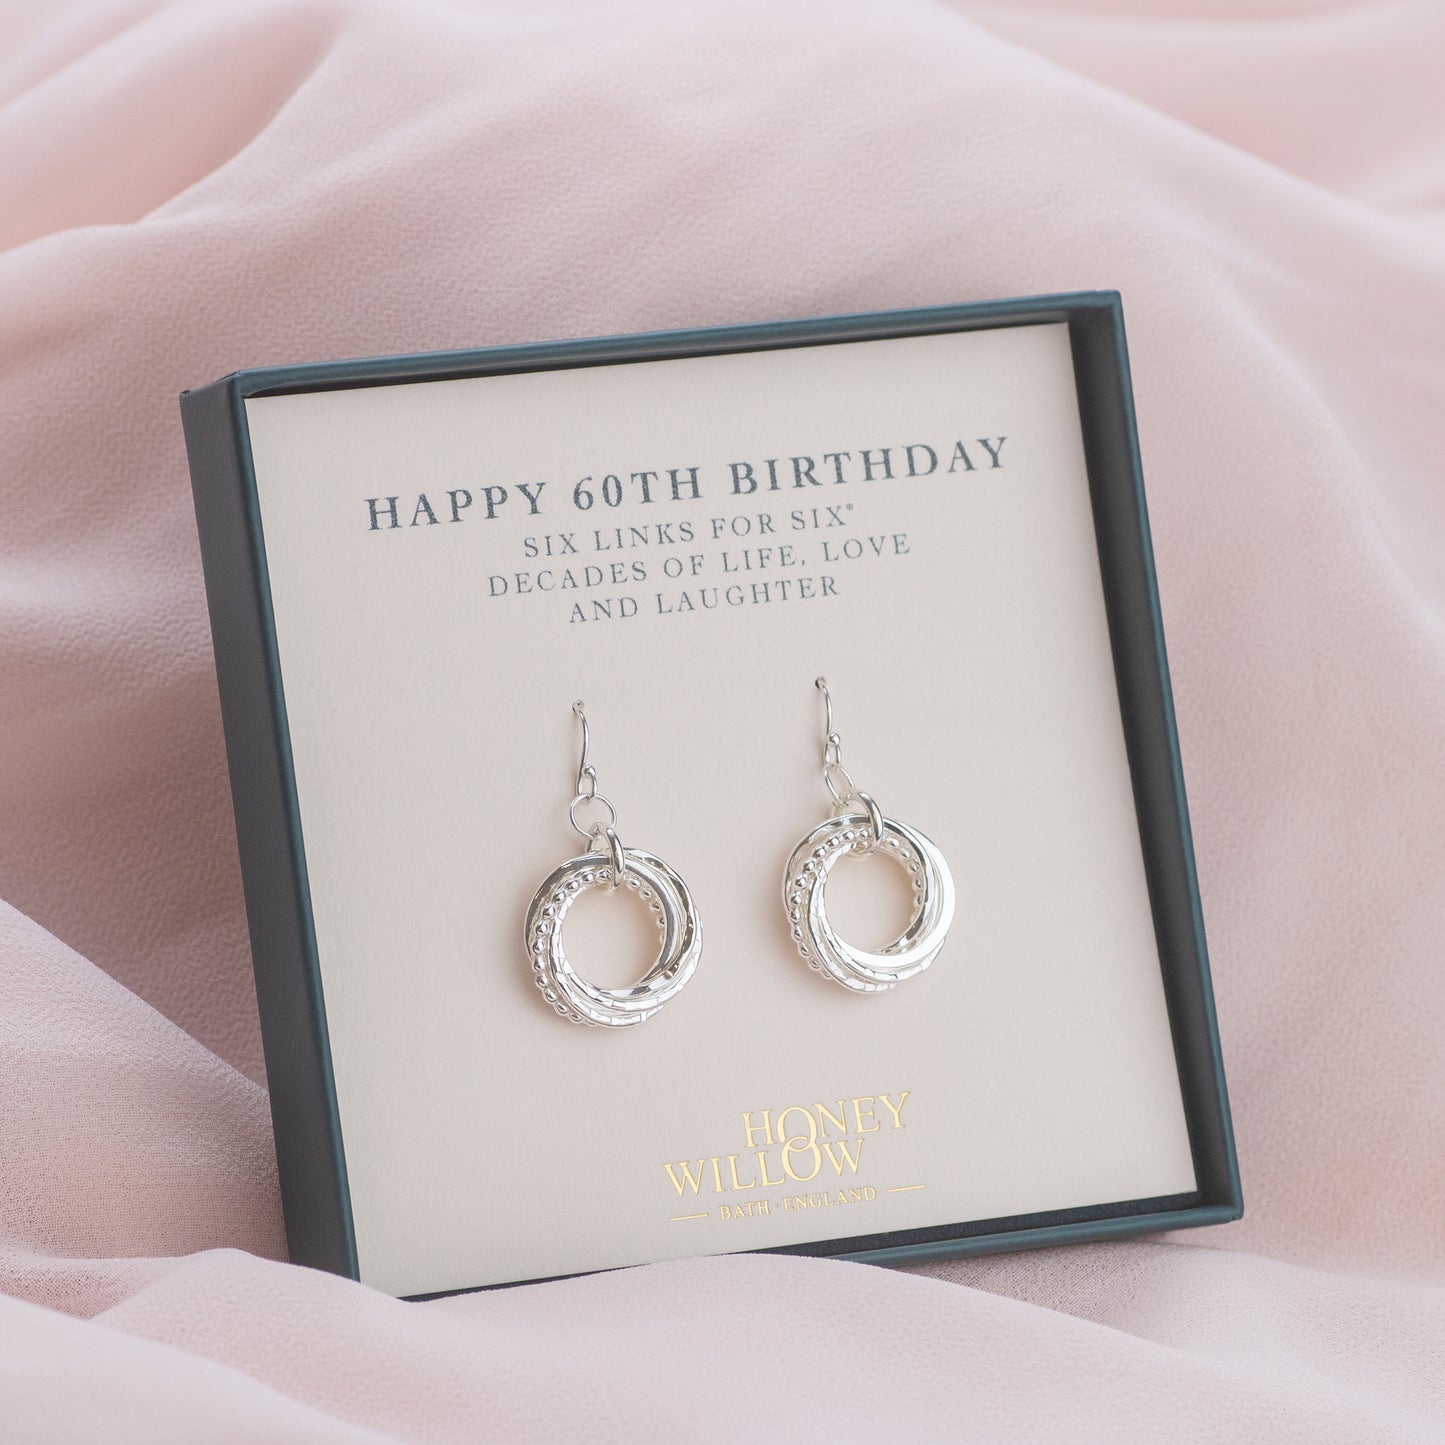 60th Birthday Earrings - The Original 6 Links for 6 Decades Earrings - Petite Silver